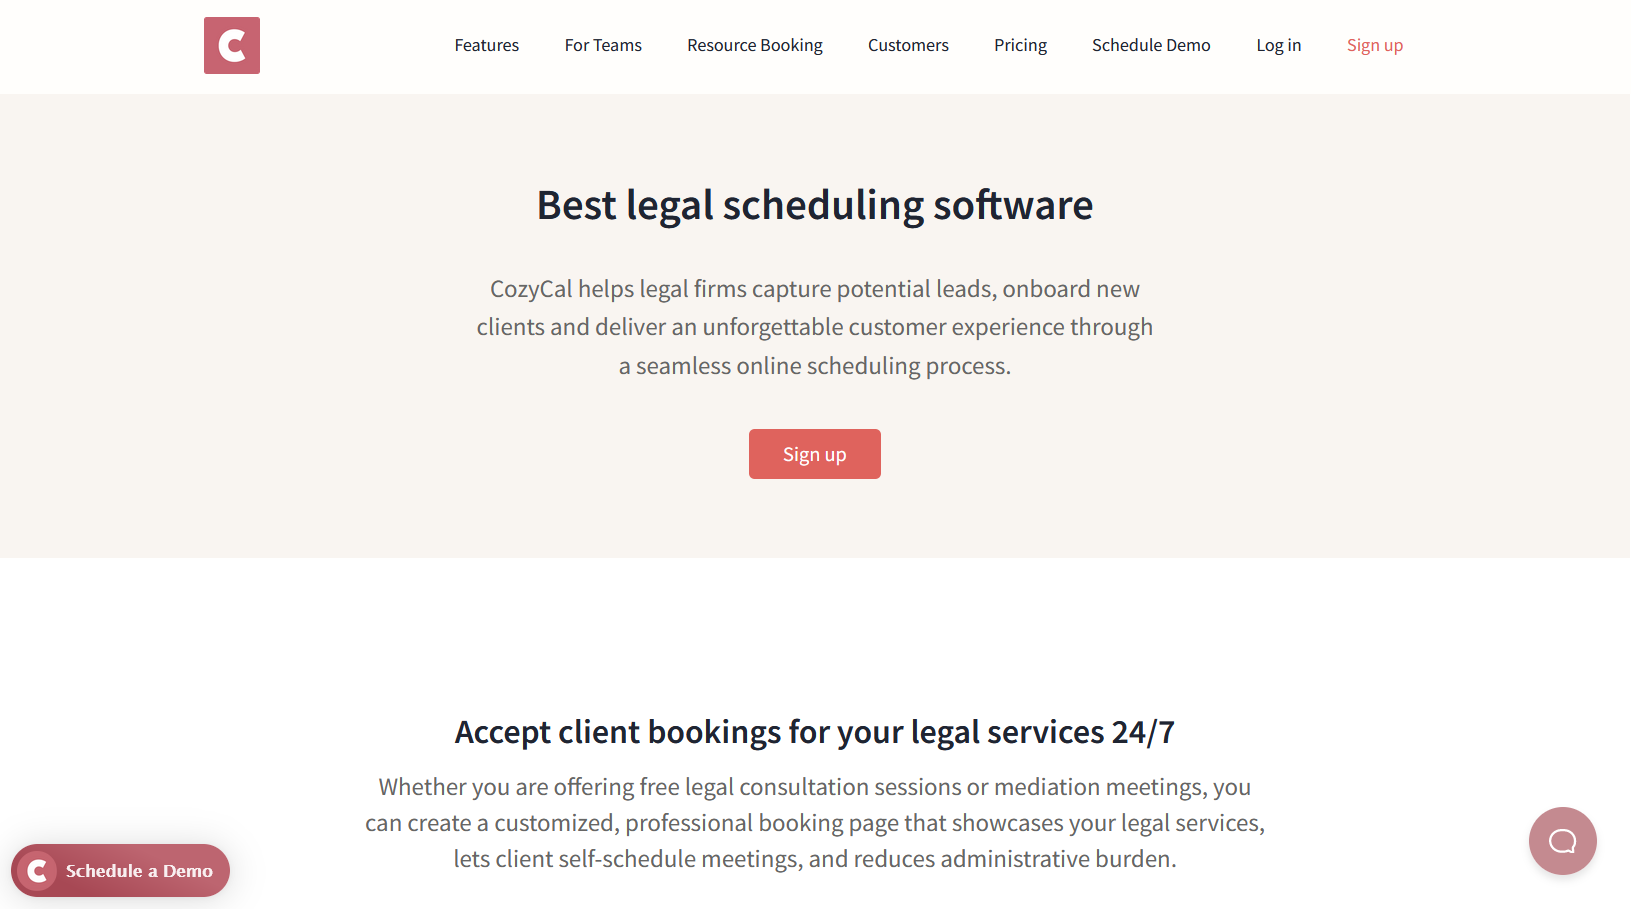 CozyCal legal scheduling software